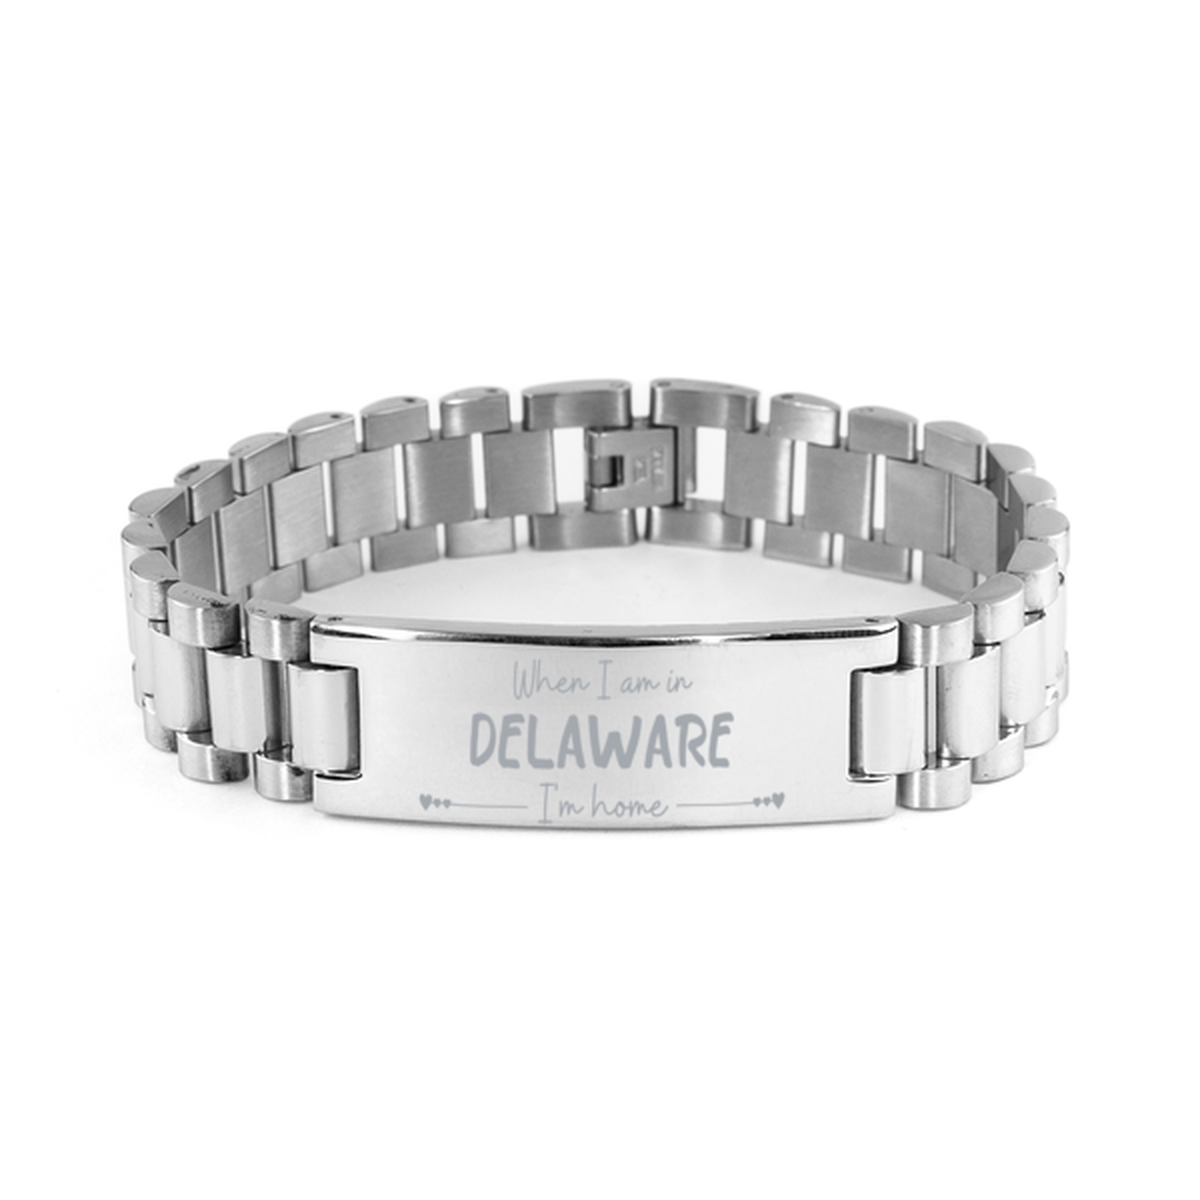 When I am in Delaware I'm home Ladder Stainless Steel Bracelet, Cheap Gifts For Delaware, State Delaware Birthday Gifts for Friends Coworker